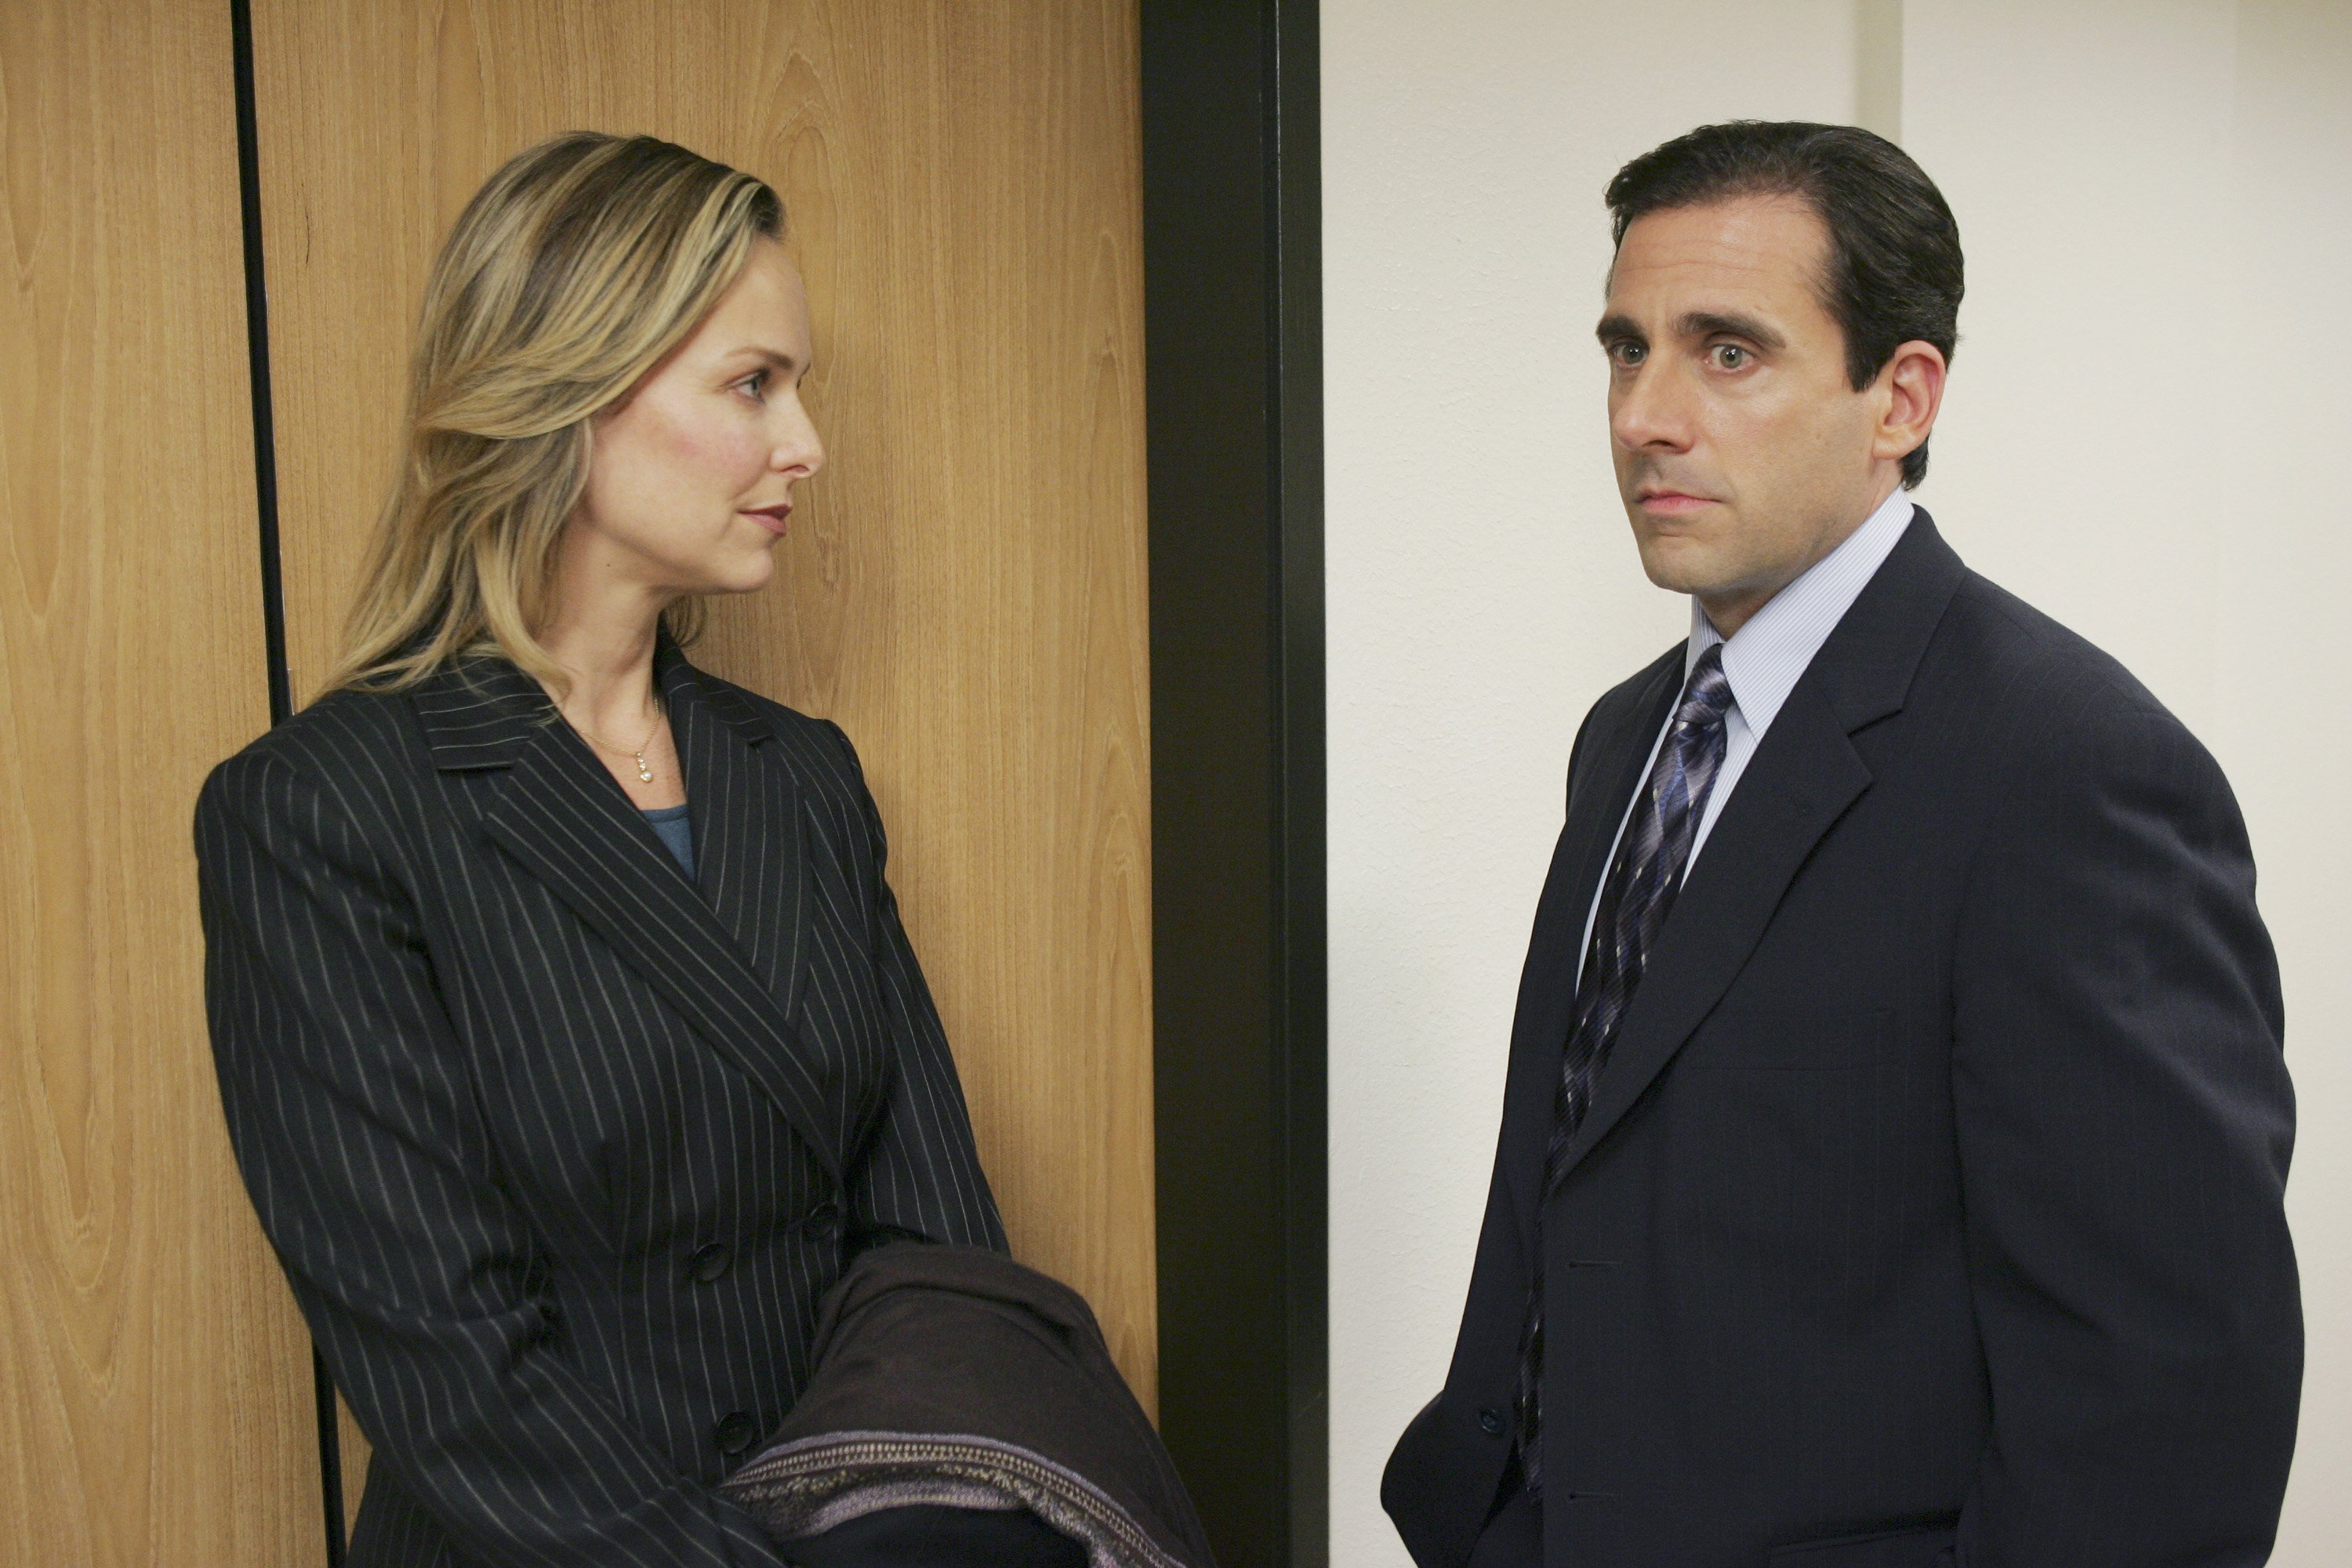 Actor Melora Hardin as Jan Levinson and actor Steve Carell as Michael Scott in 'The Office'